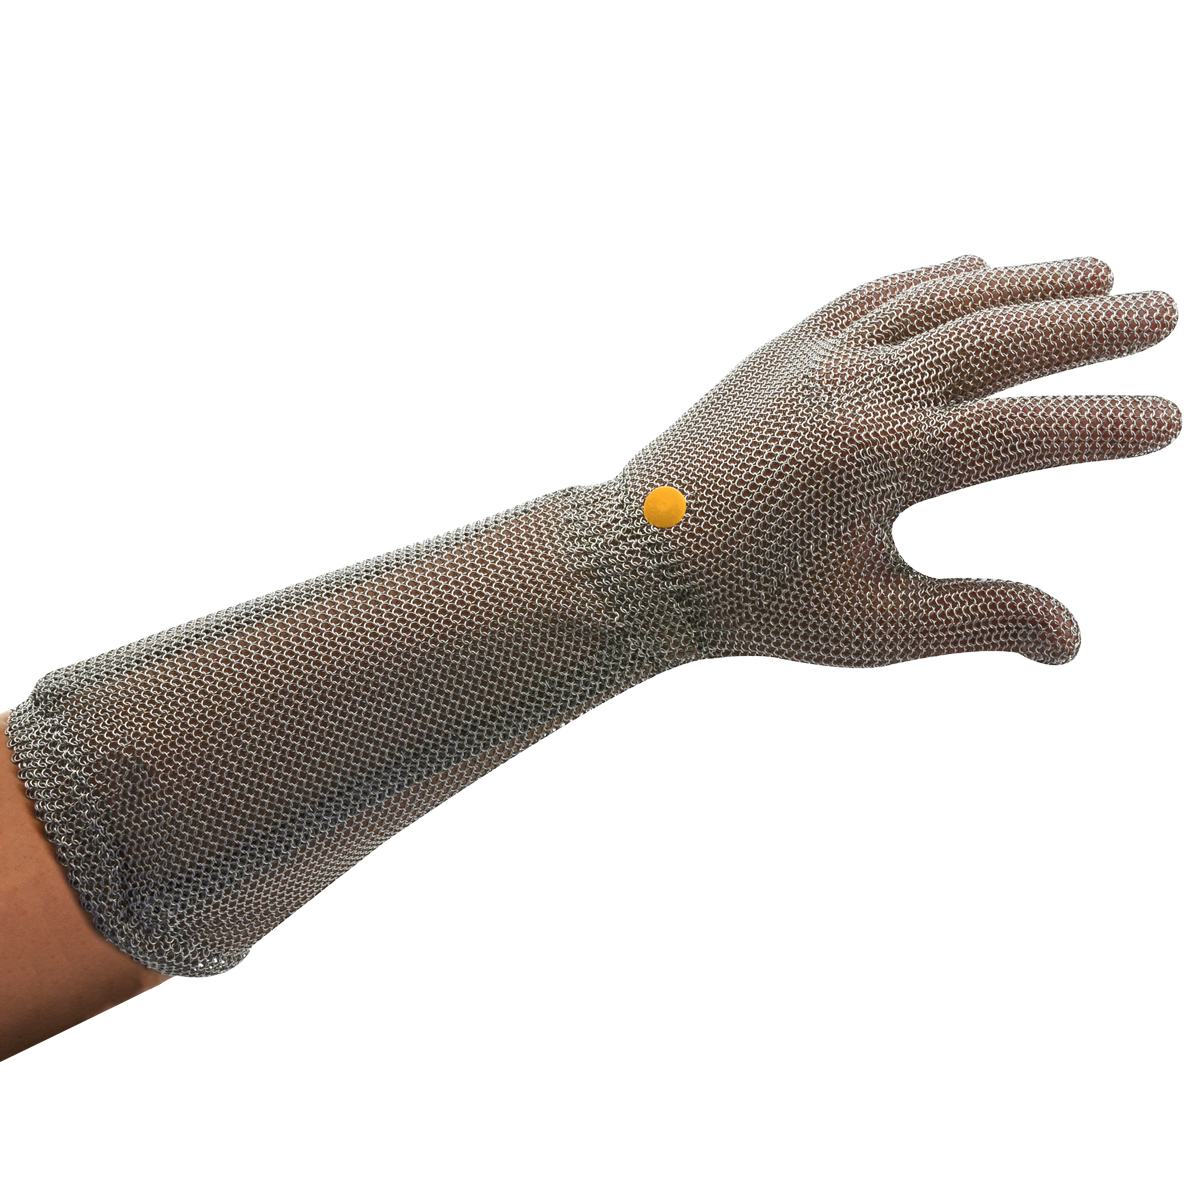 Manulatex Chain Mesh Glove, Long Cuff With Spring